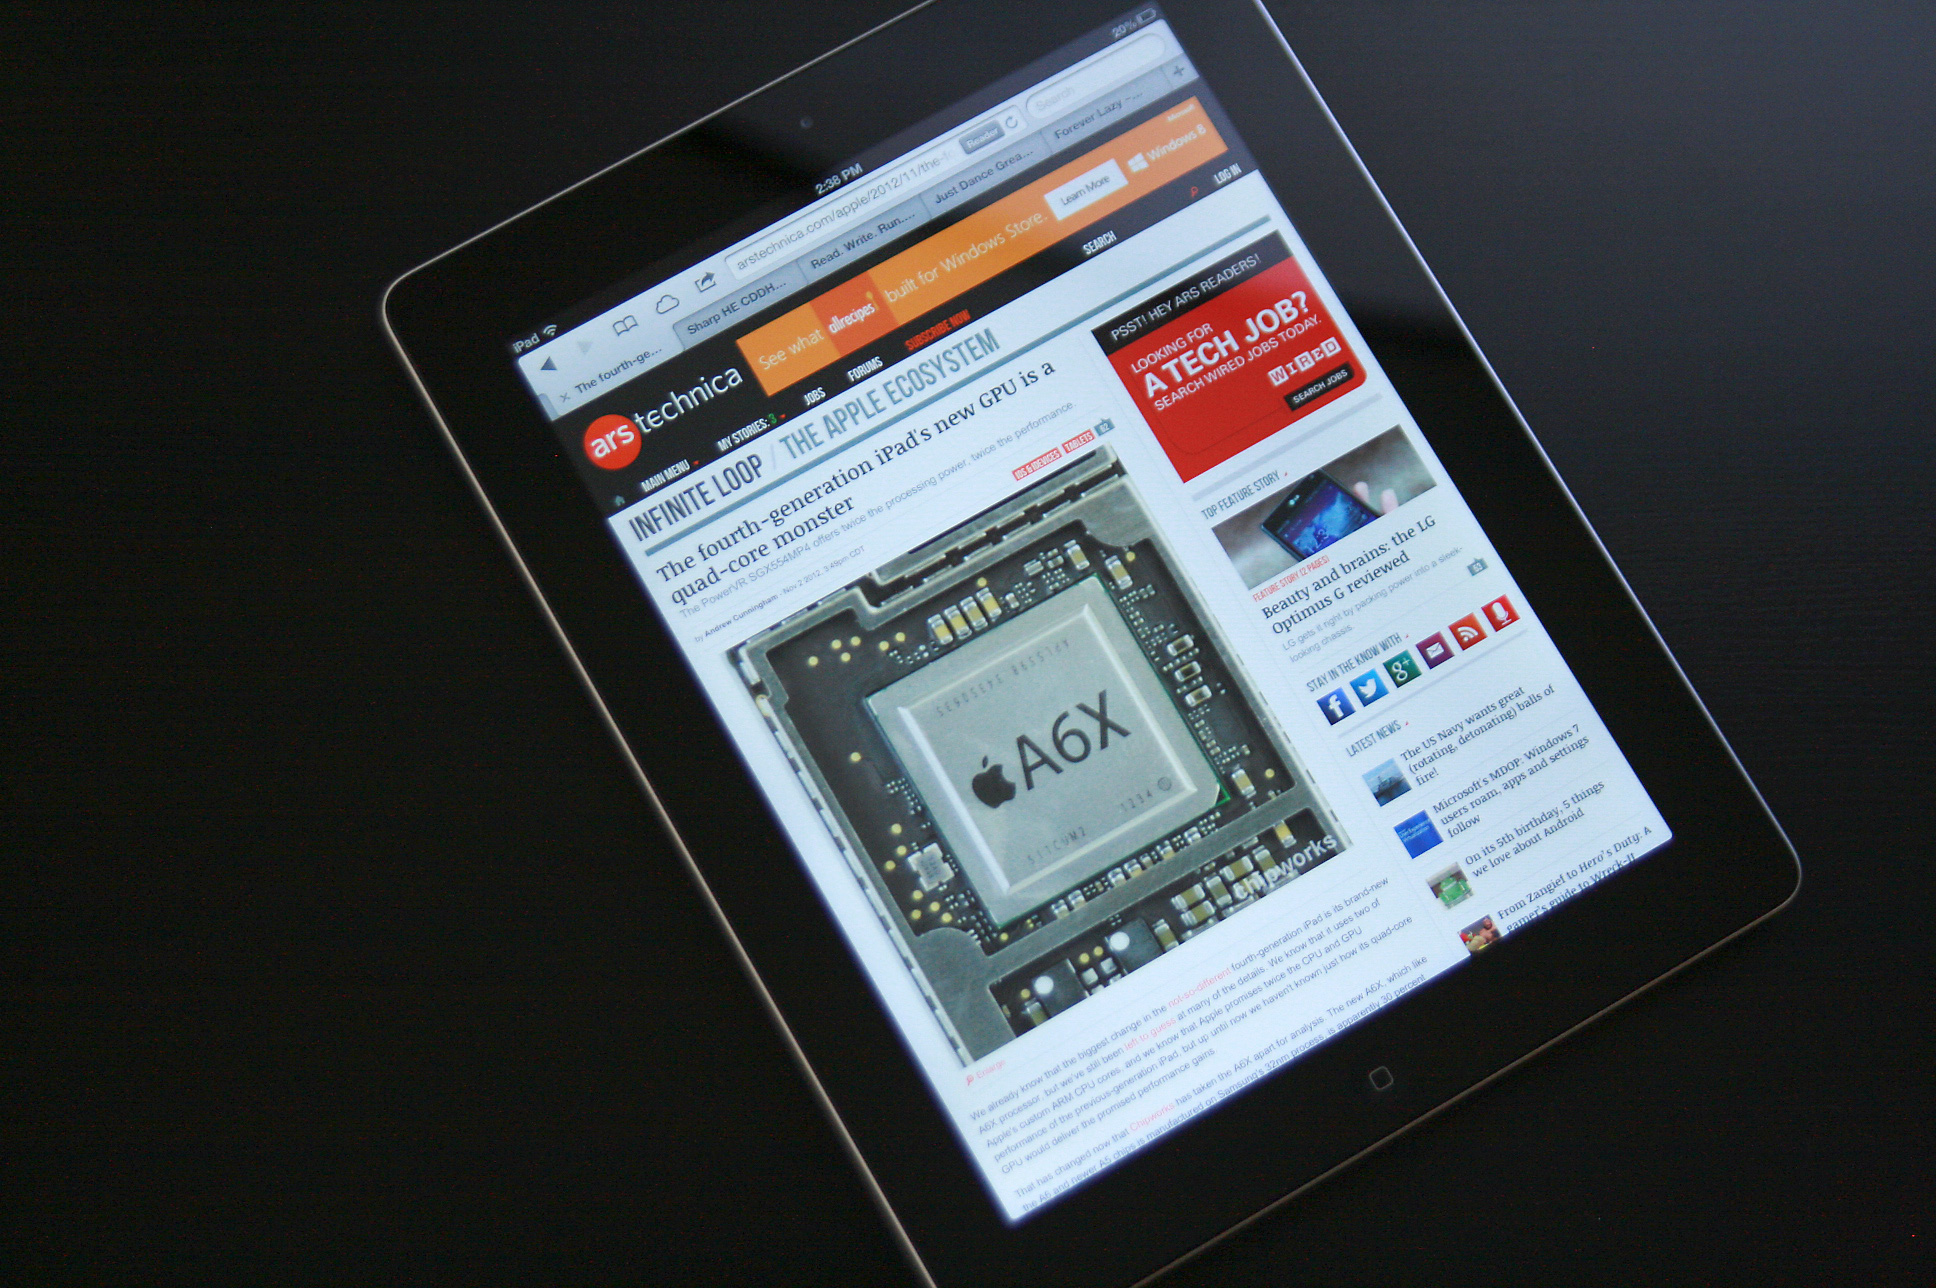 fordel lotteri Analytisk Review: iPad 4 has processing power to spare | Ars Technica